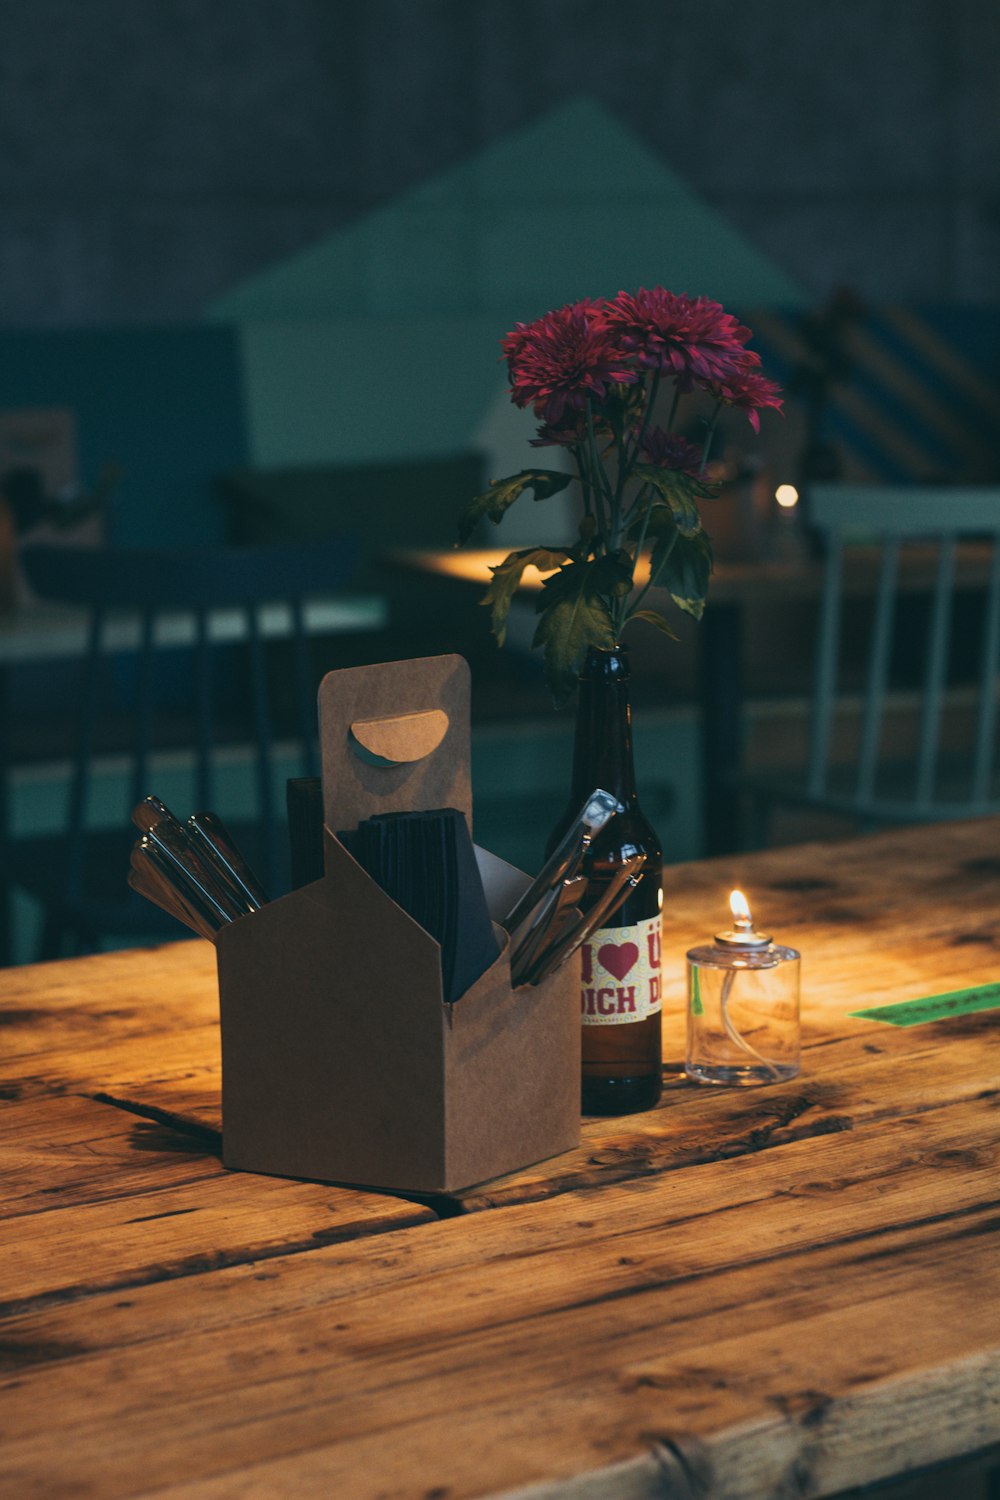 brown box beside bottle on brown wooden table